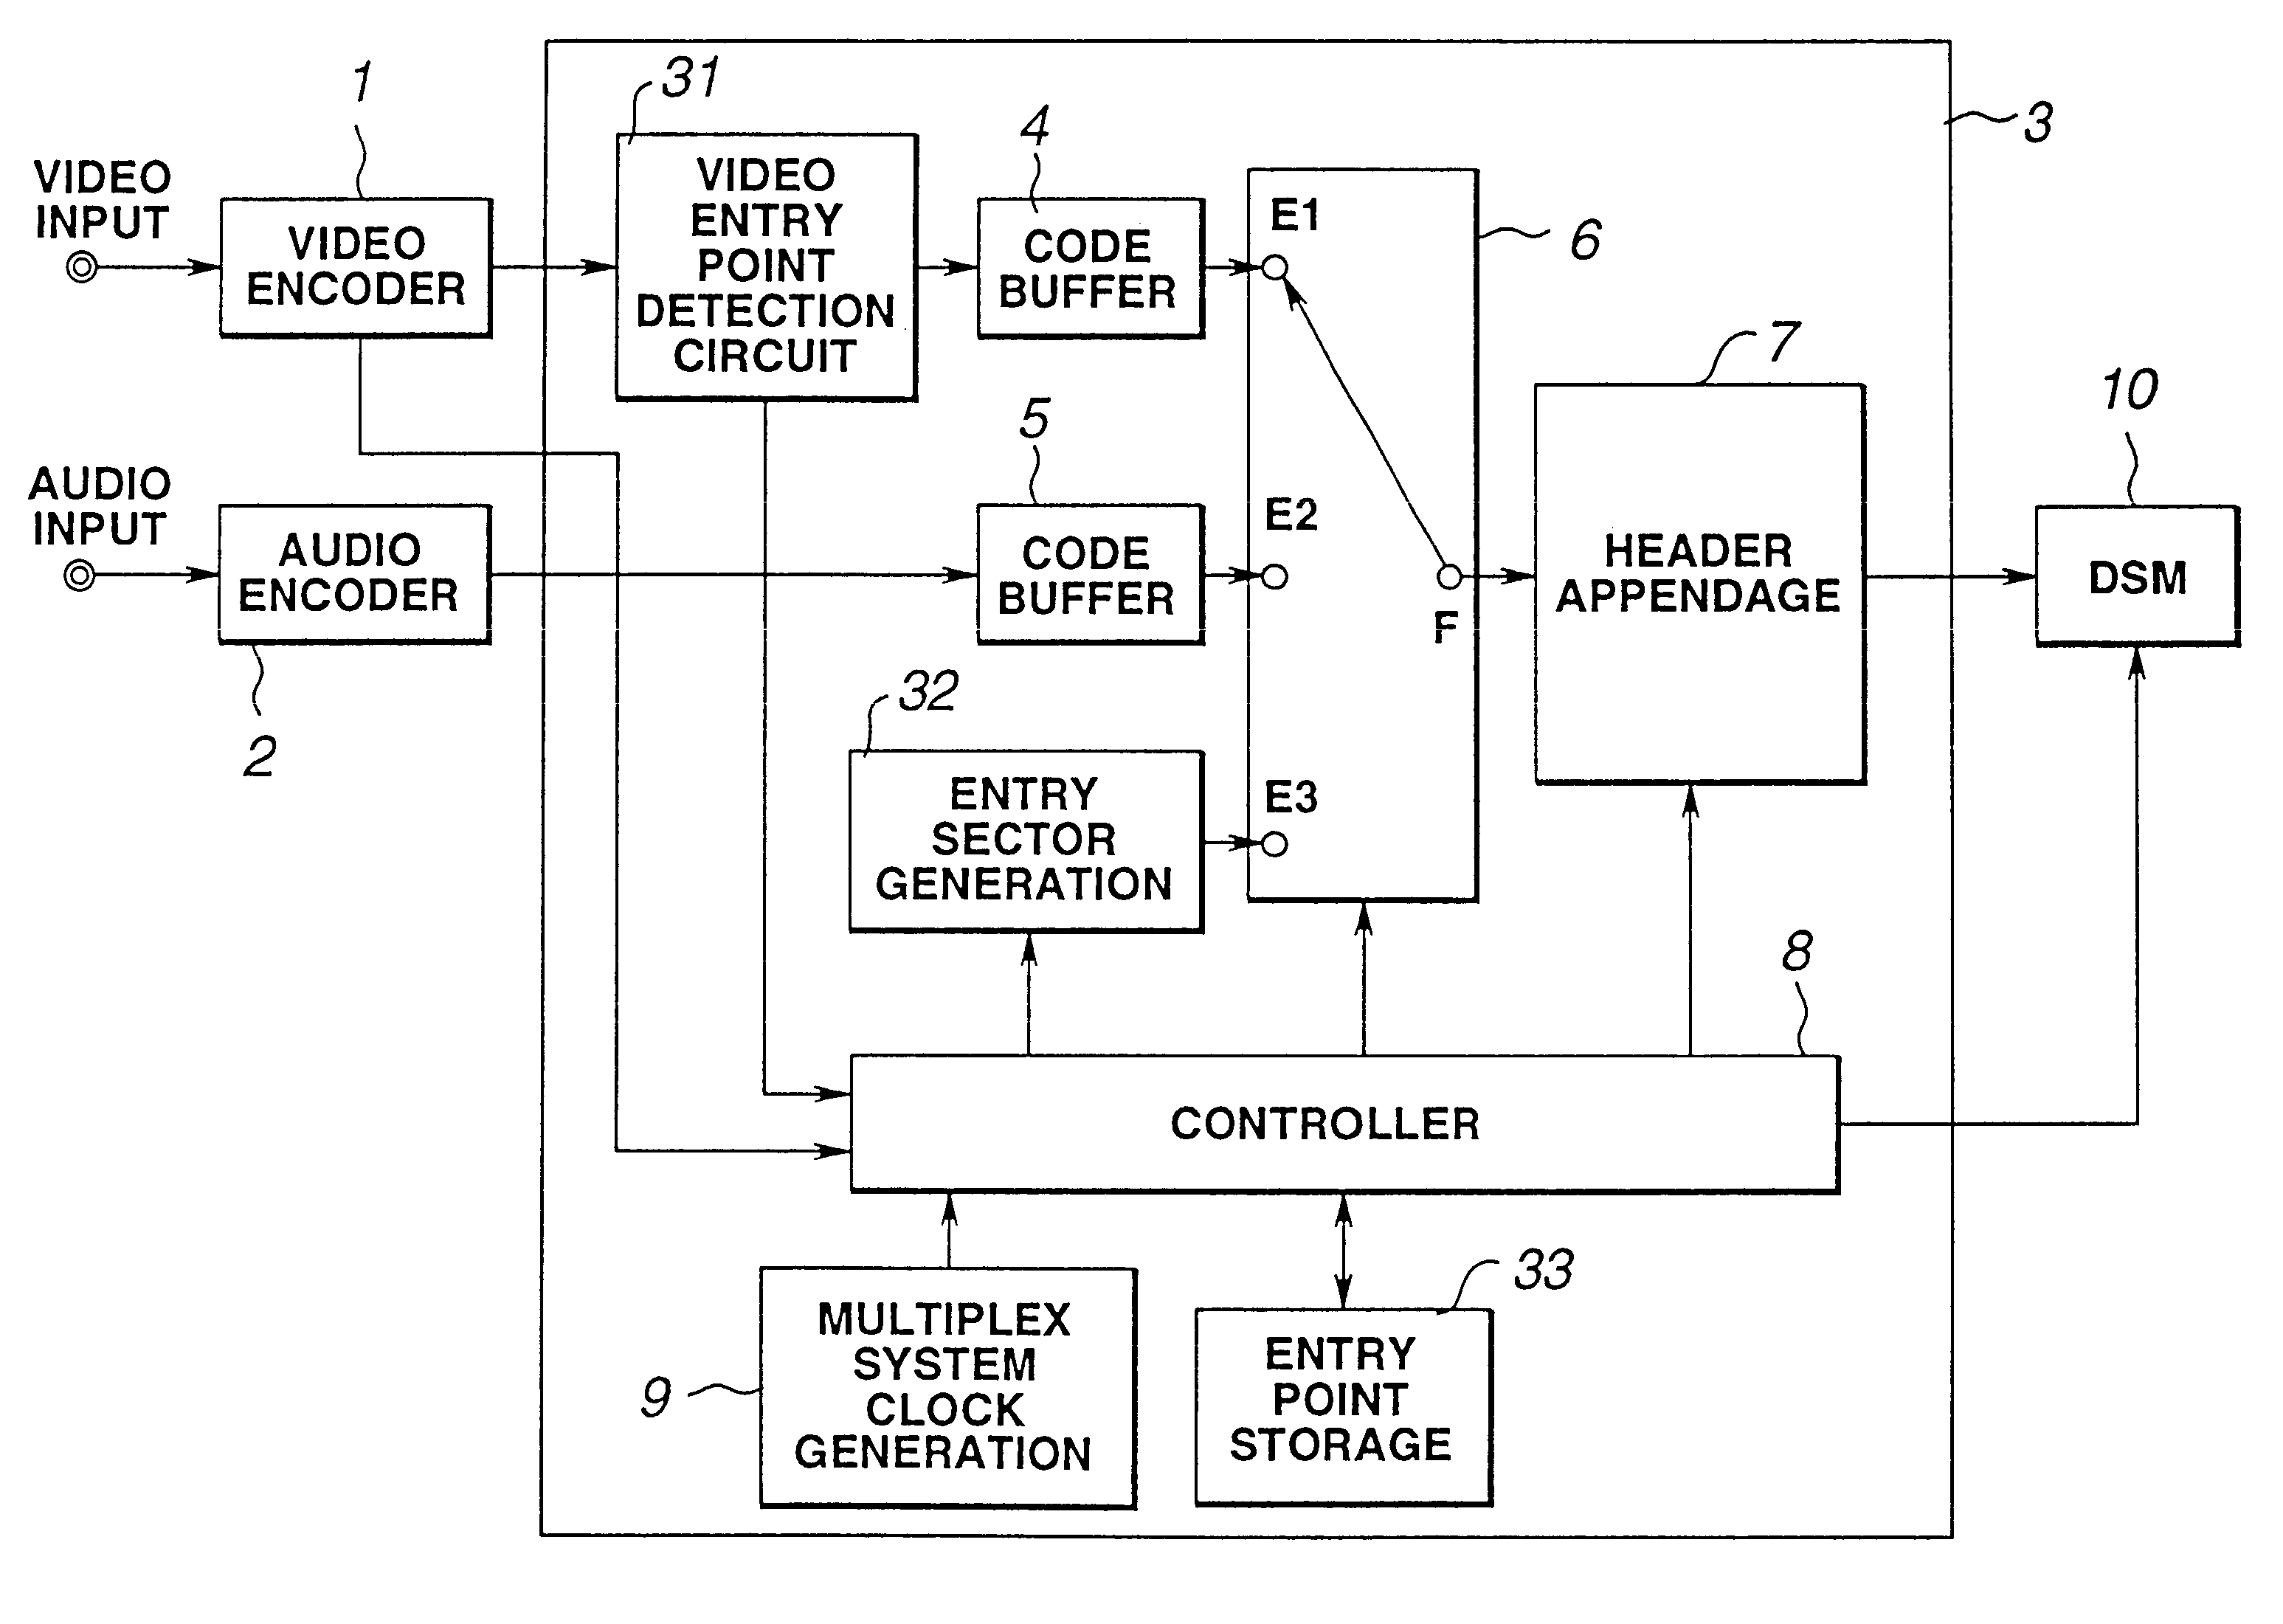 Apparatus and method for encoding and decoding digital video data